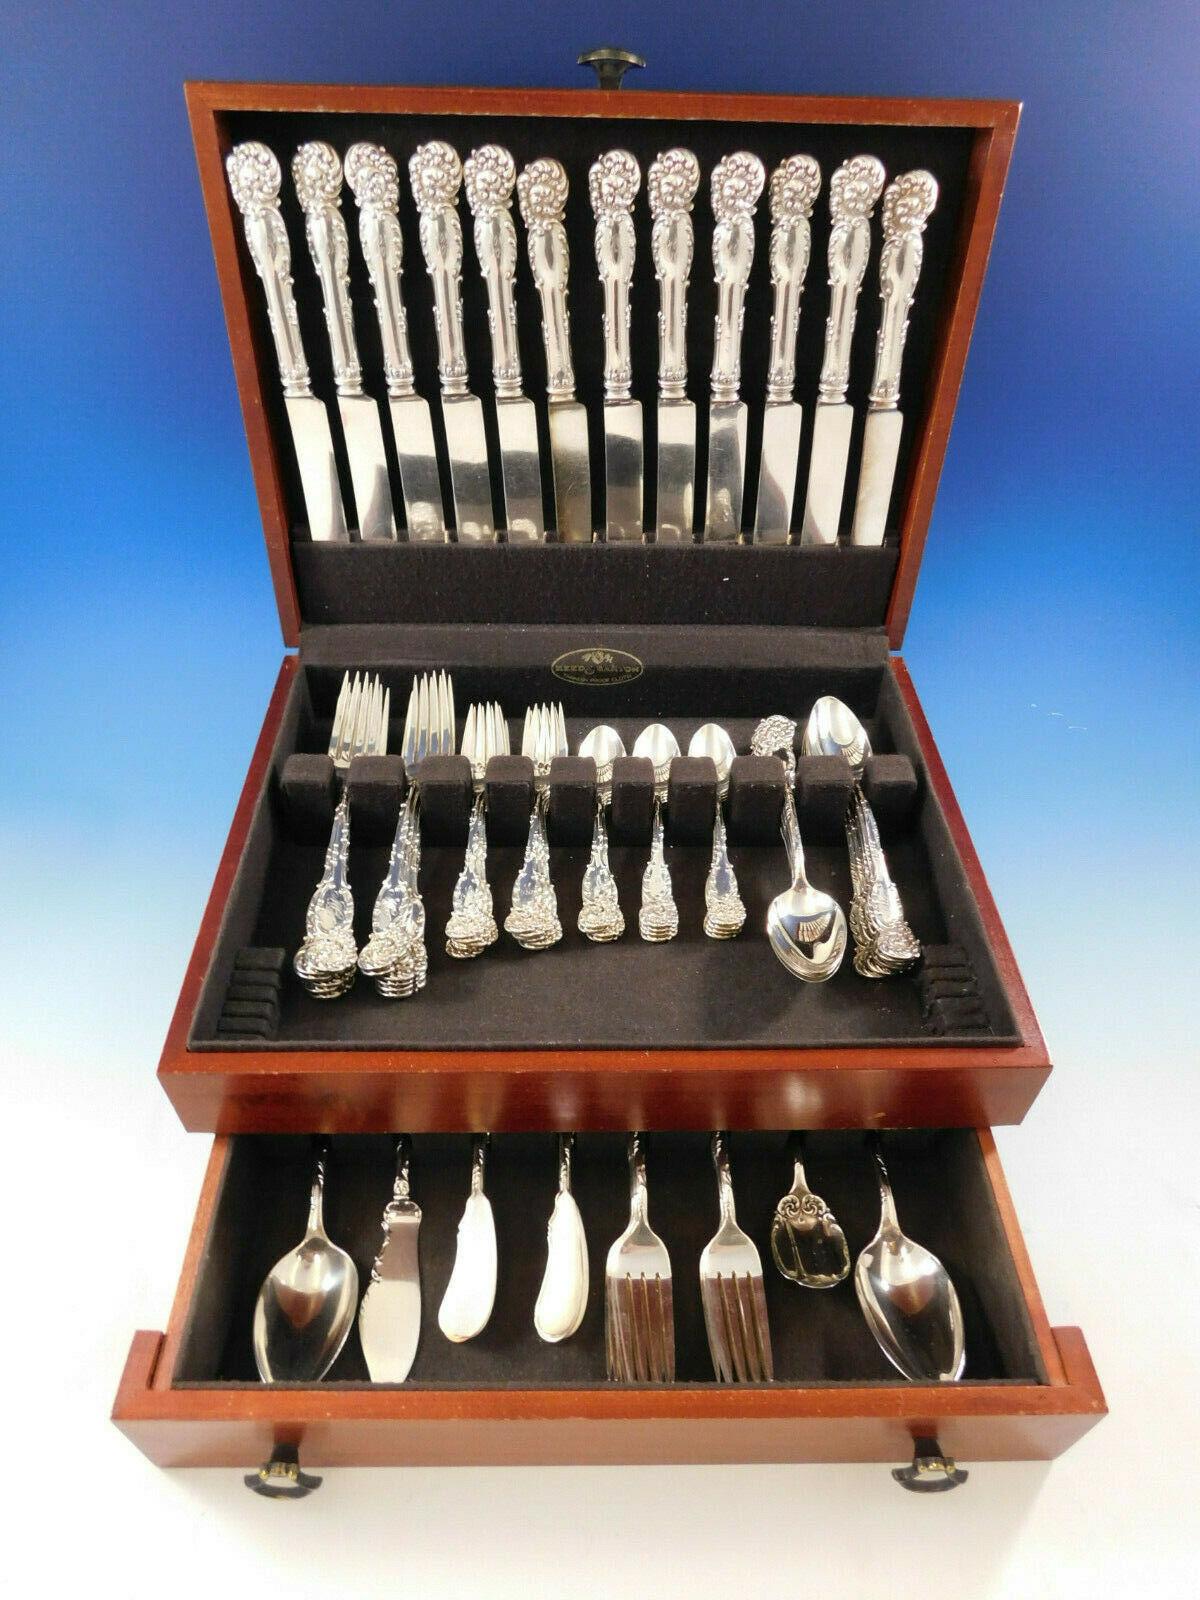 Dinner size La Reine by Reed & Barton sterling silver flatware set, 88 pieces. This set includes:

12 dinner size knives, 10